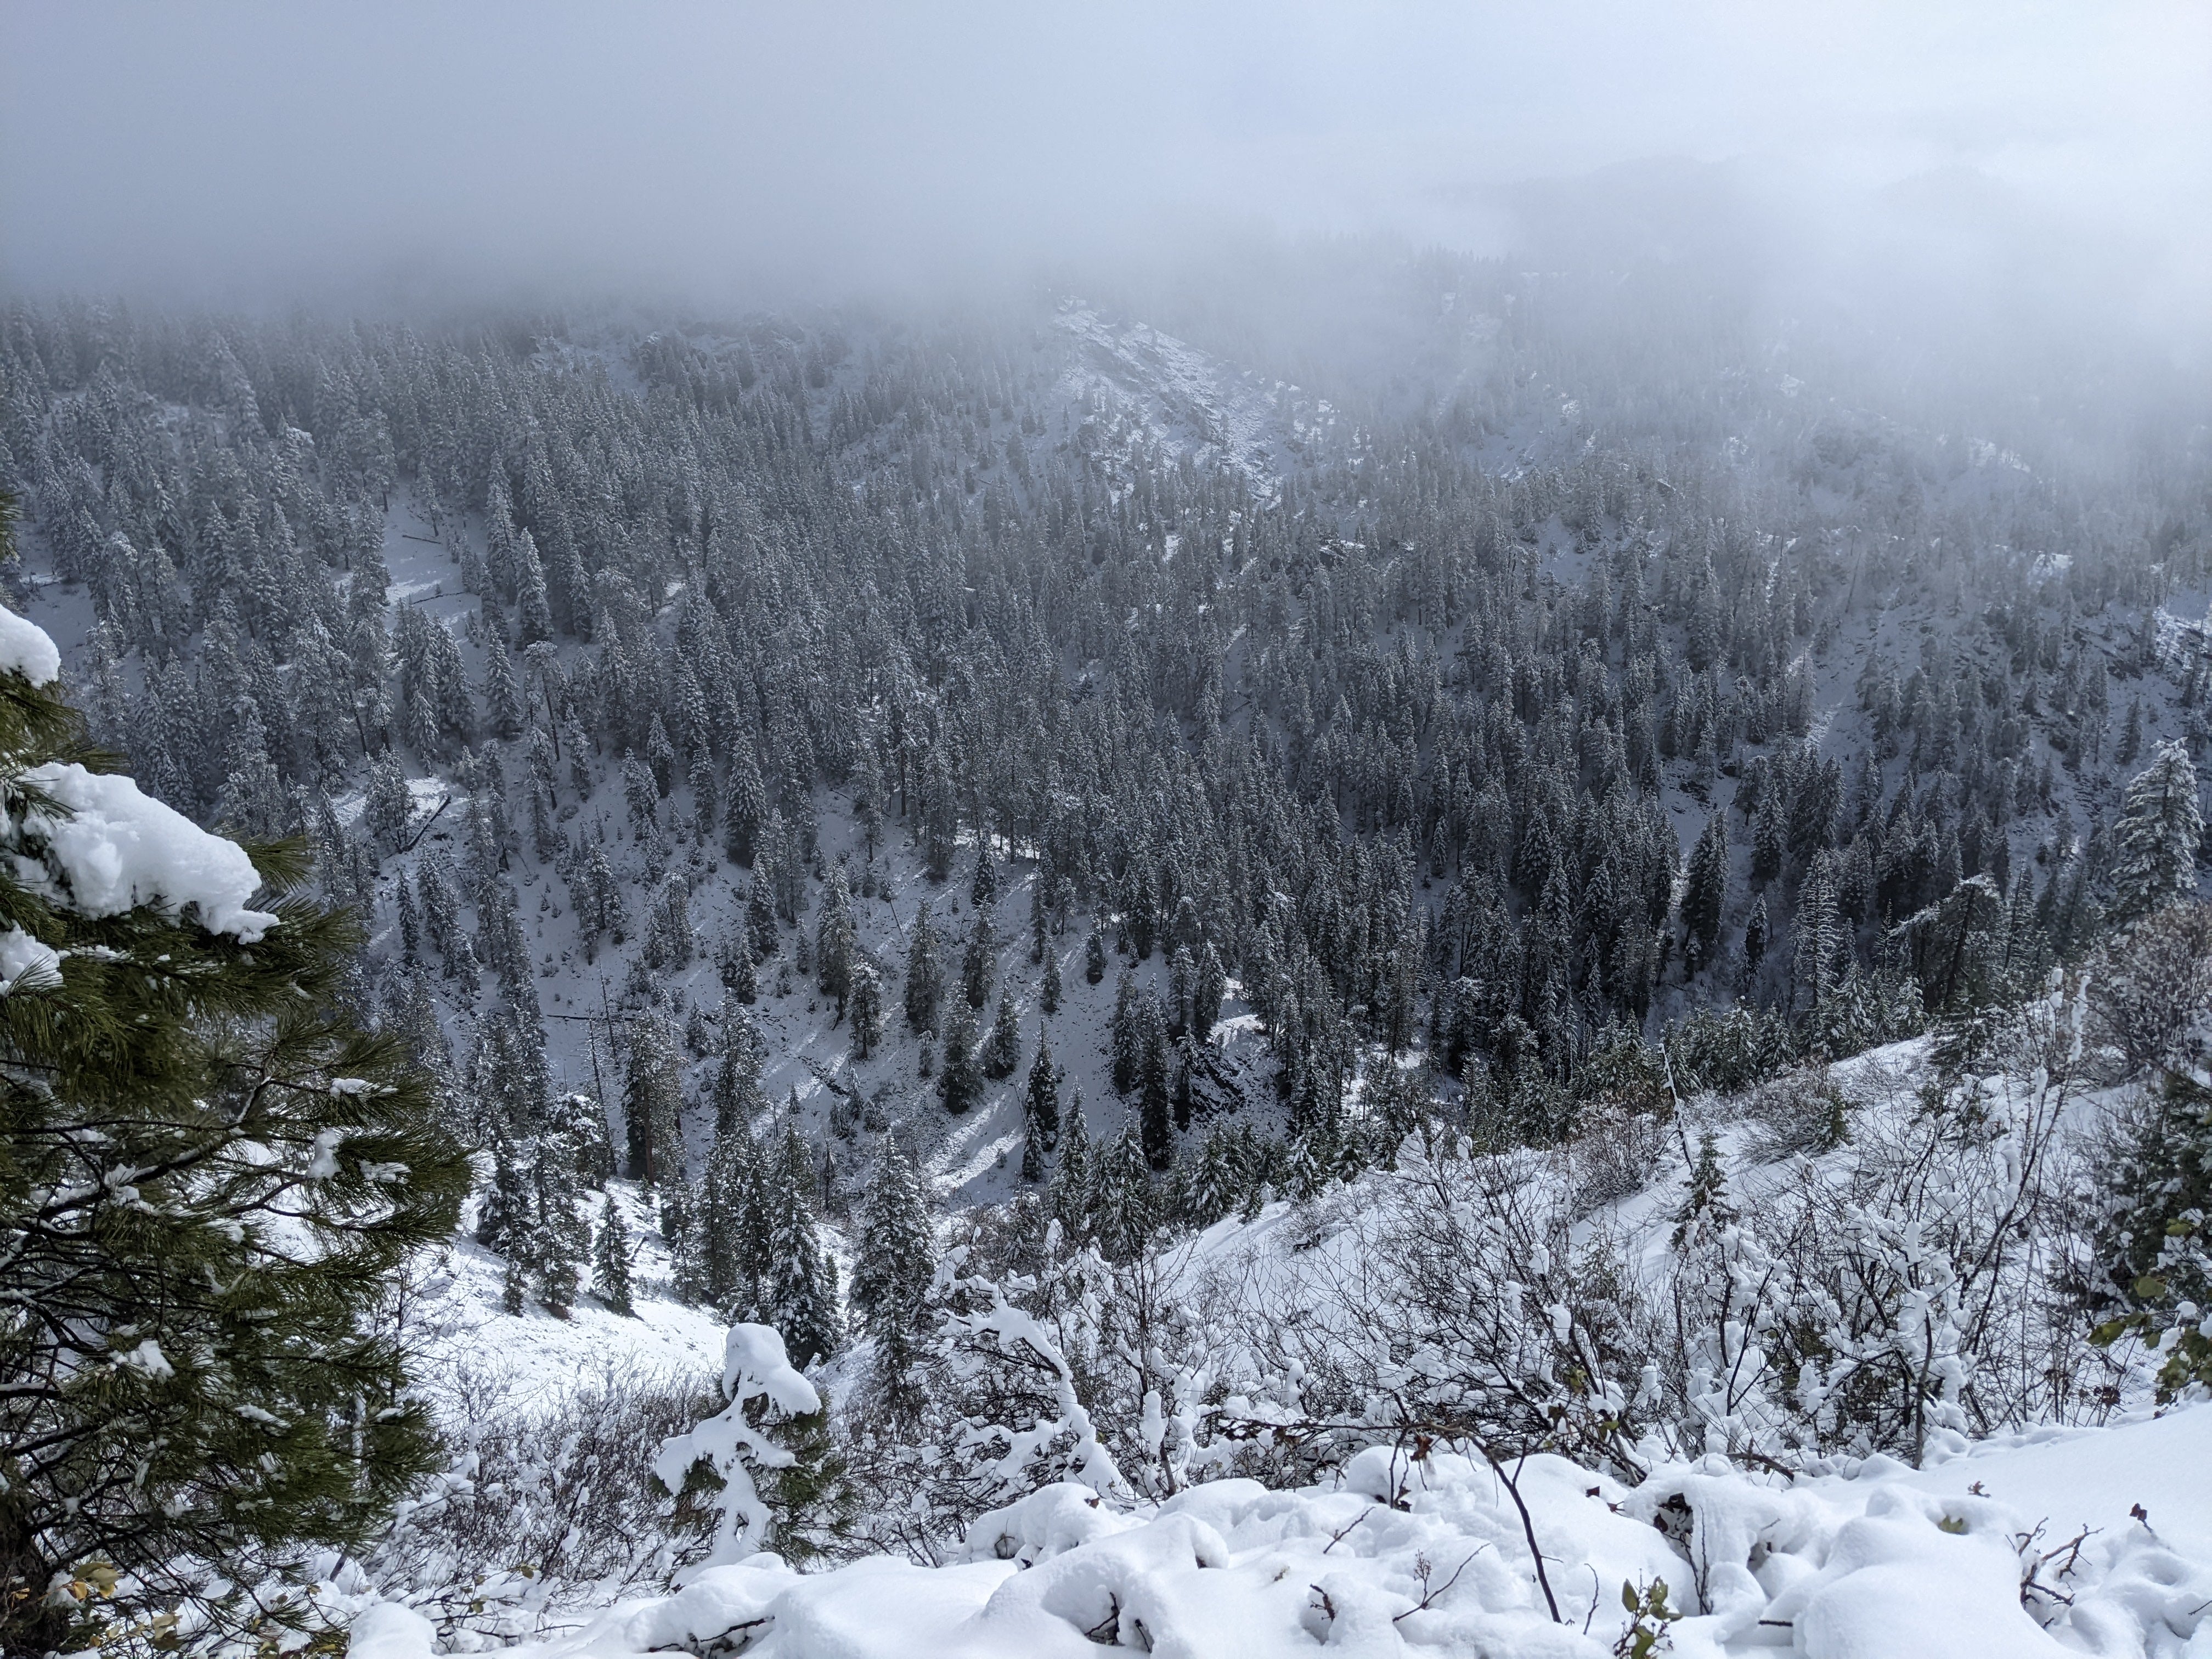 a cold and snowy view looking down through conifer forest. a mist of clouds covers the top of the photo